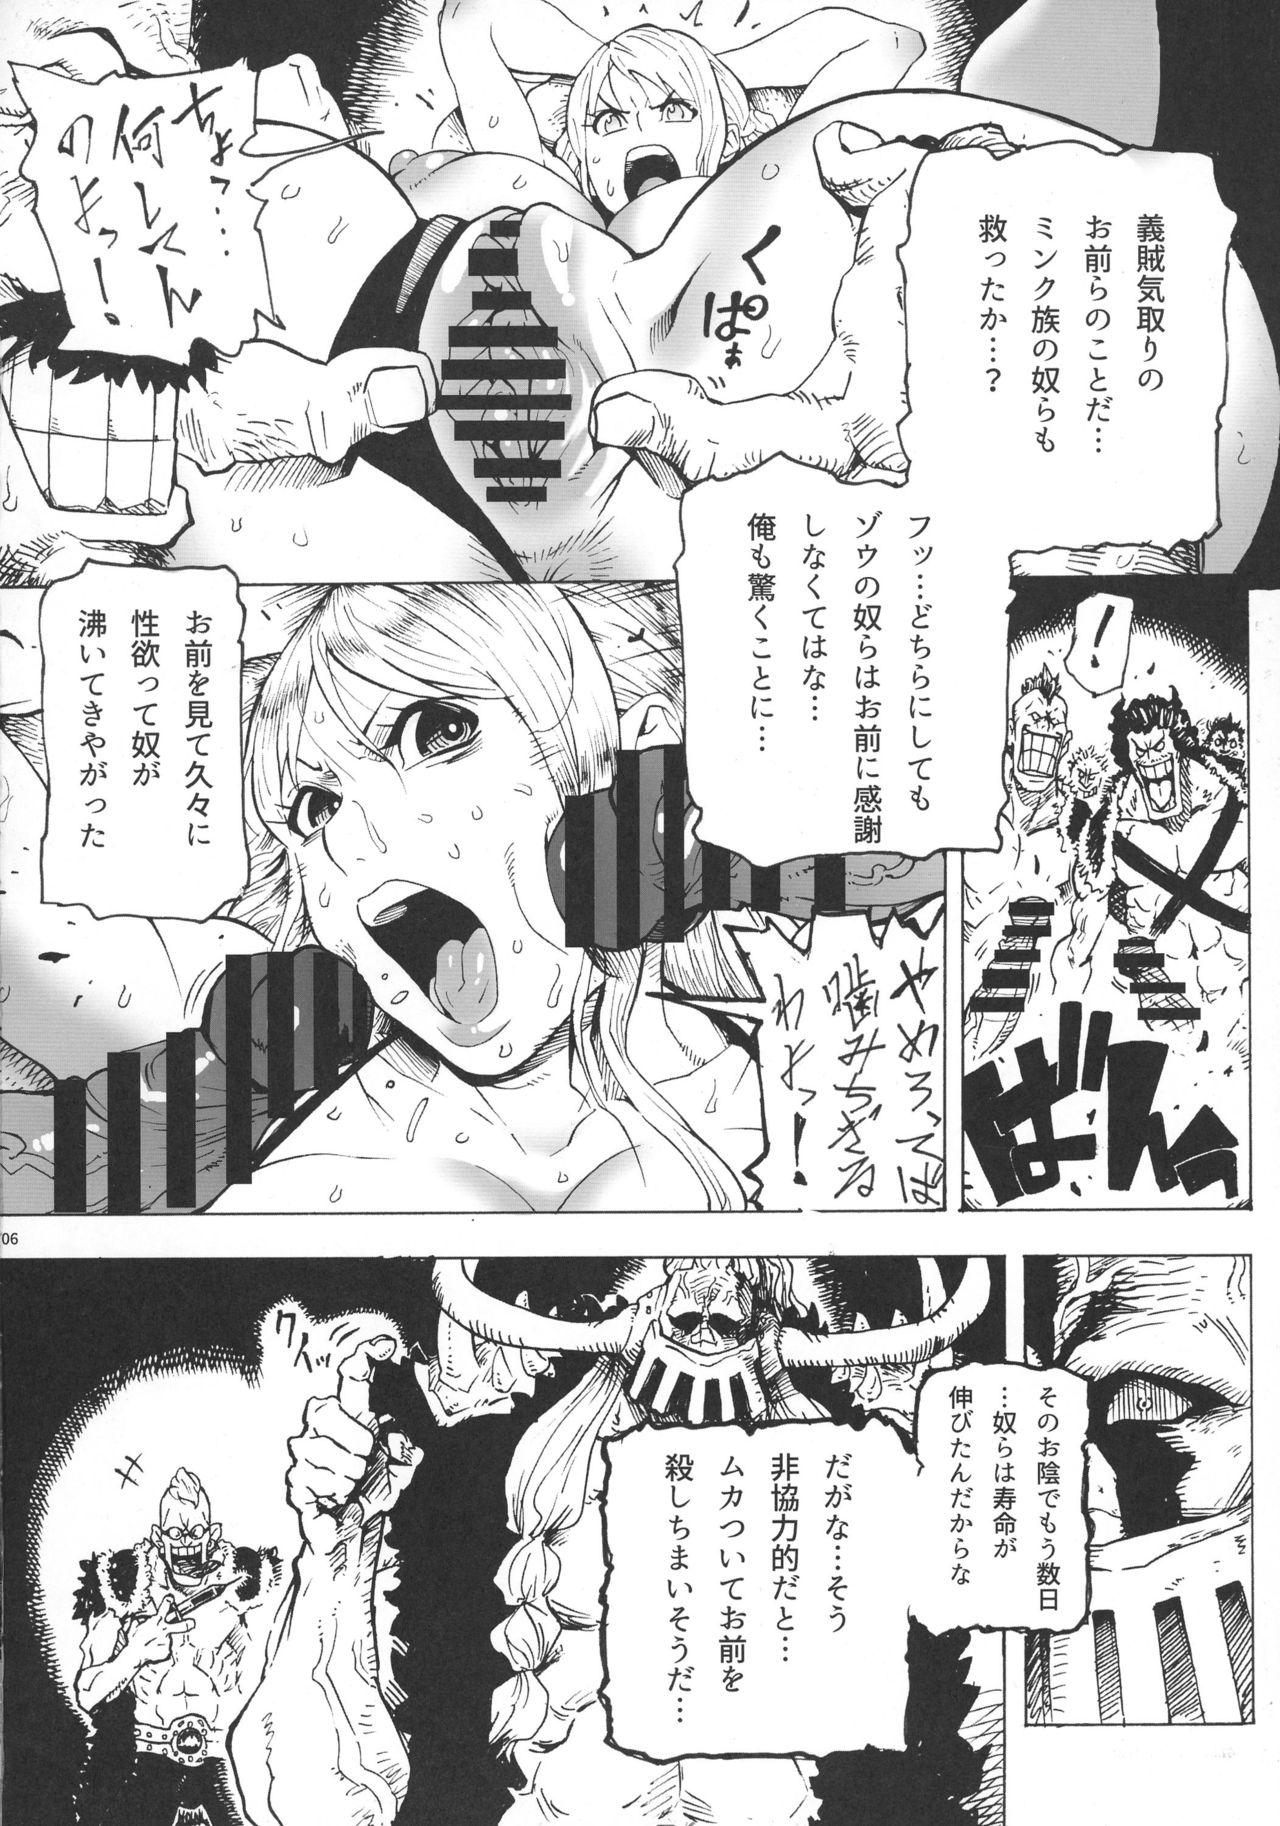 Brazil P.O.M Another Episode "J.A.C.K" - One piece Hung - Page 8